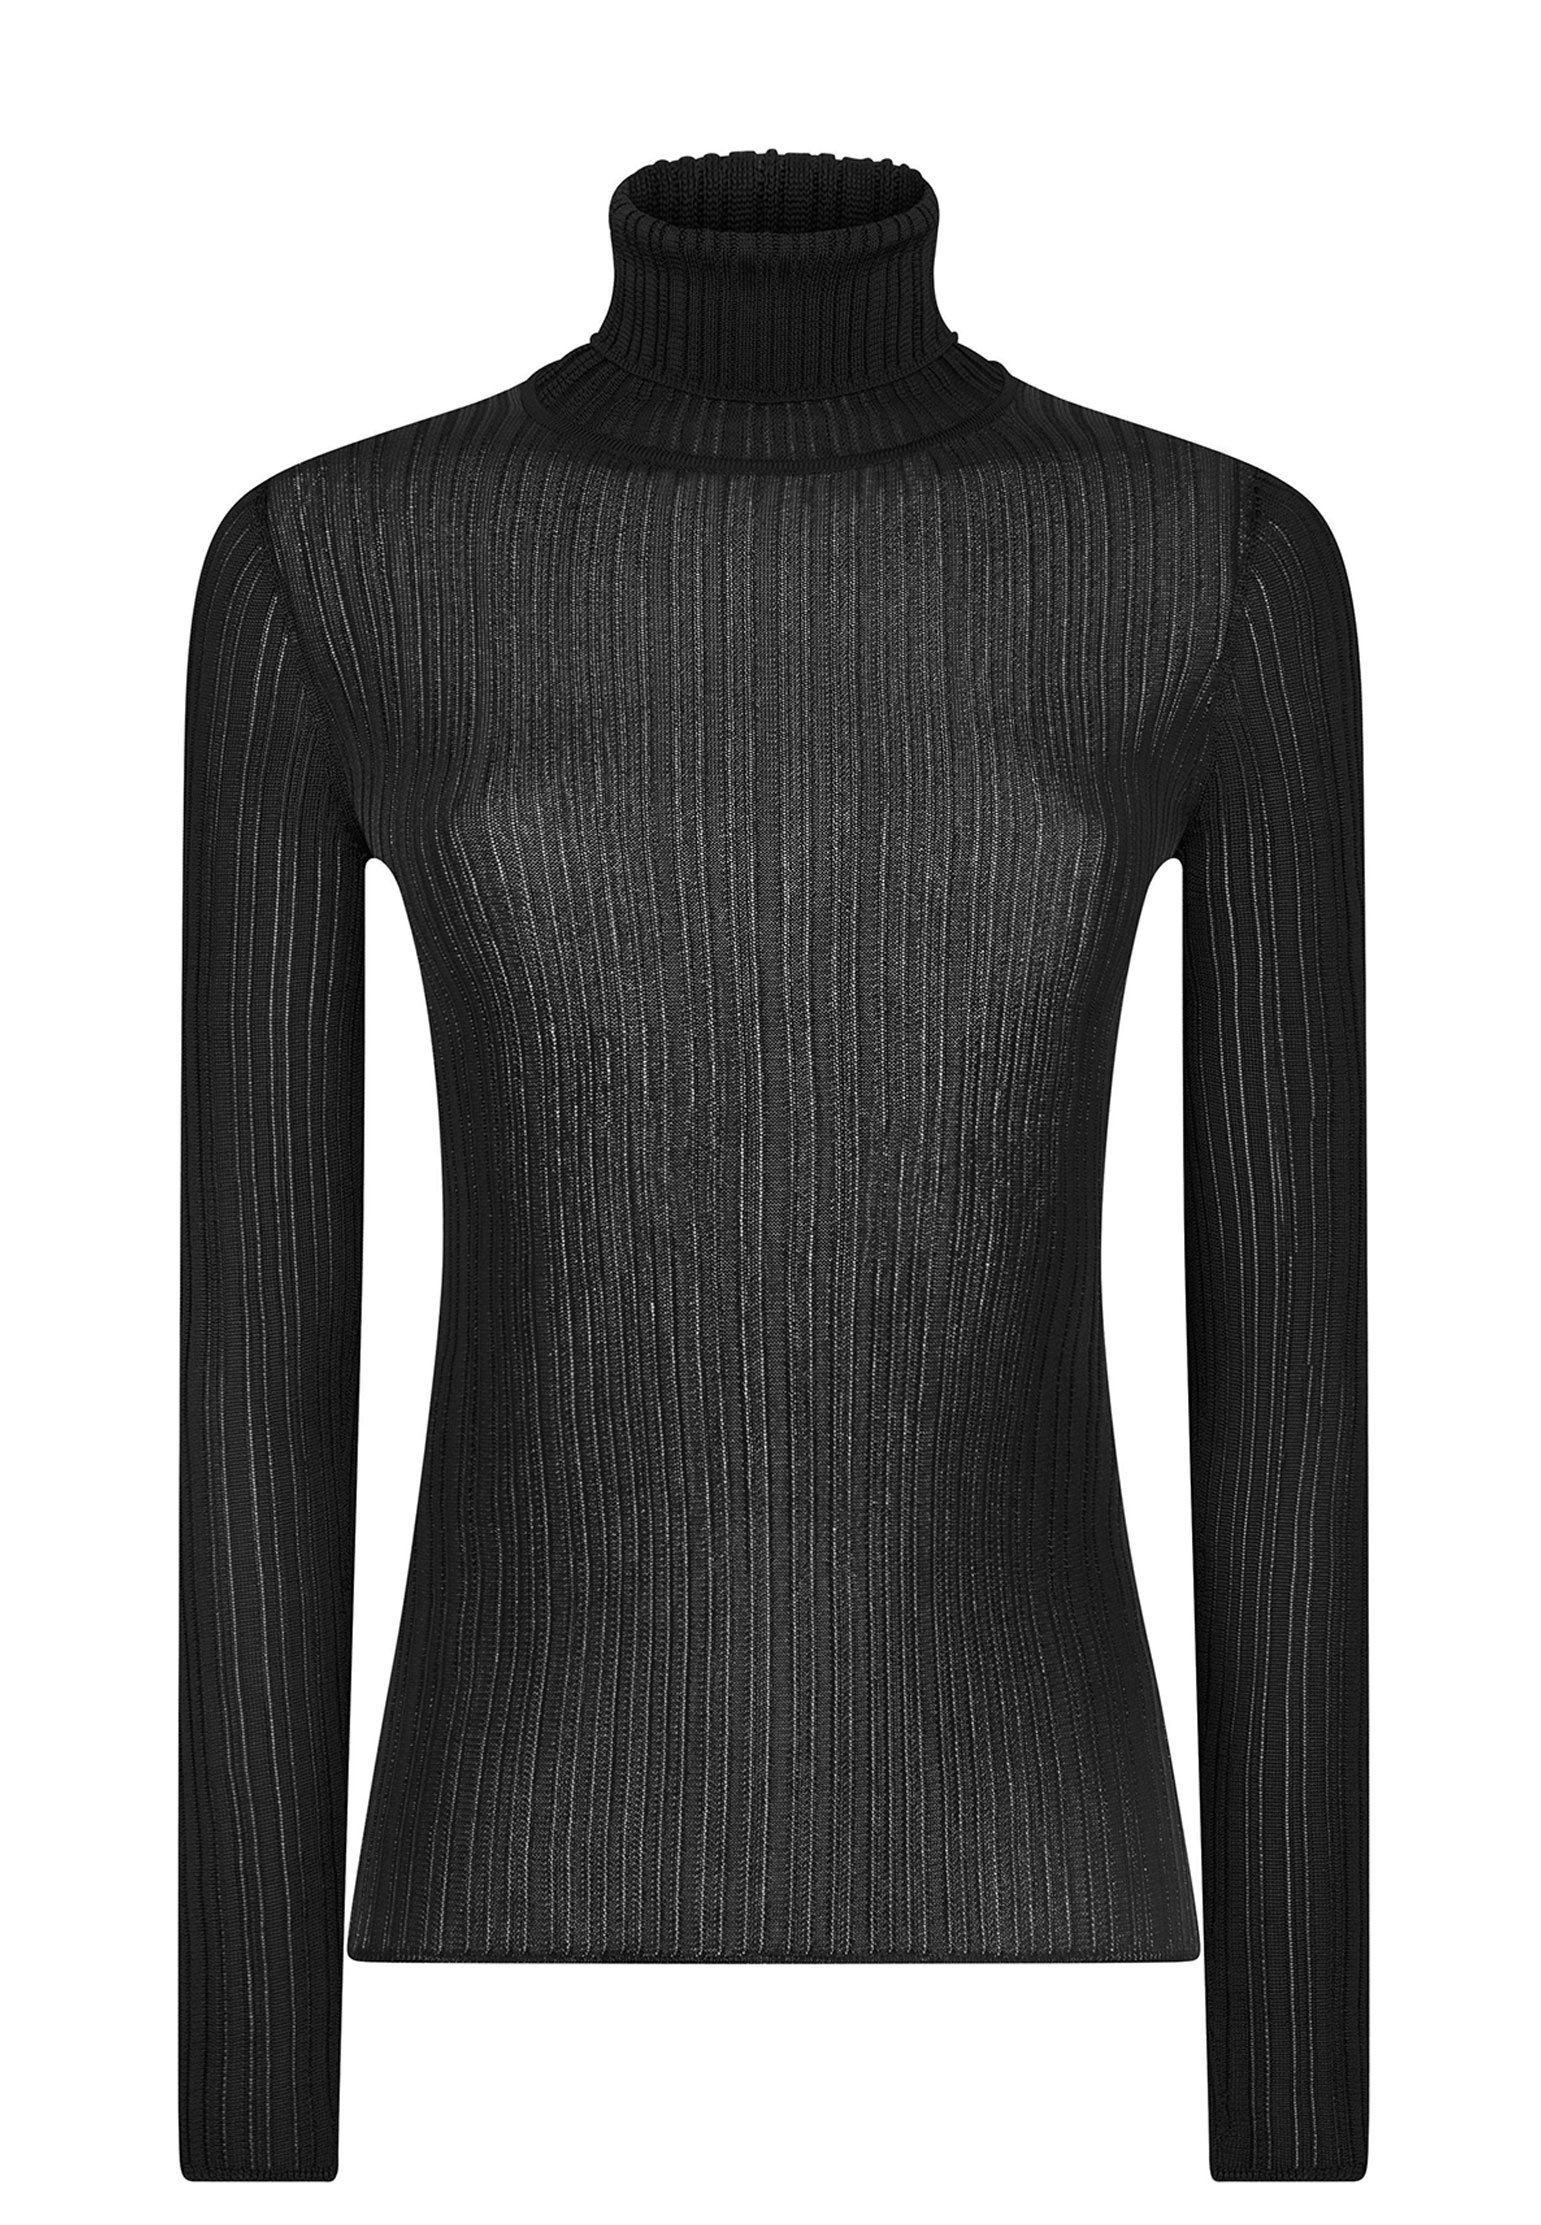 Pullover TOM FORD Color: black (Code: 2977) in online store Allure